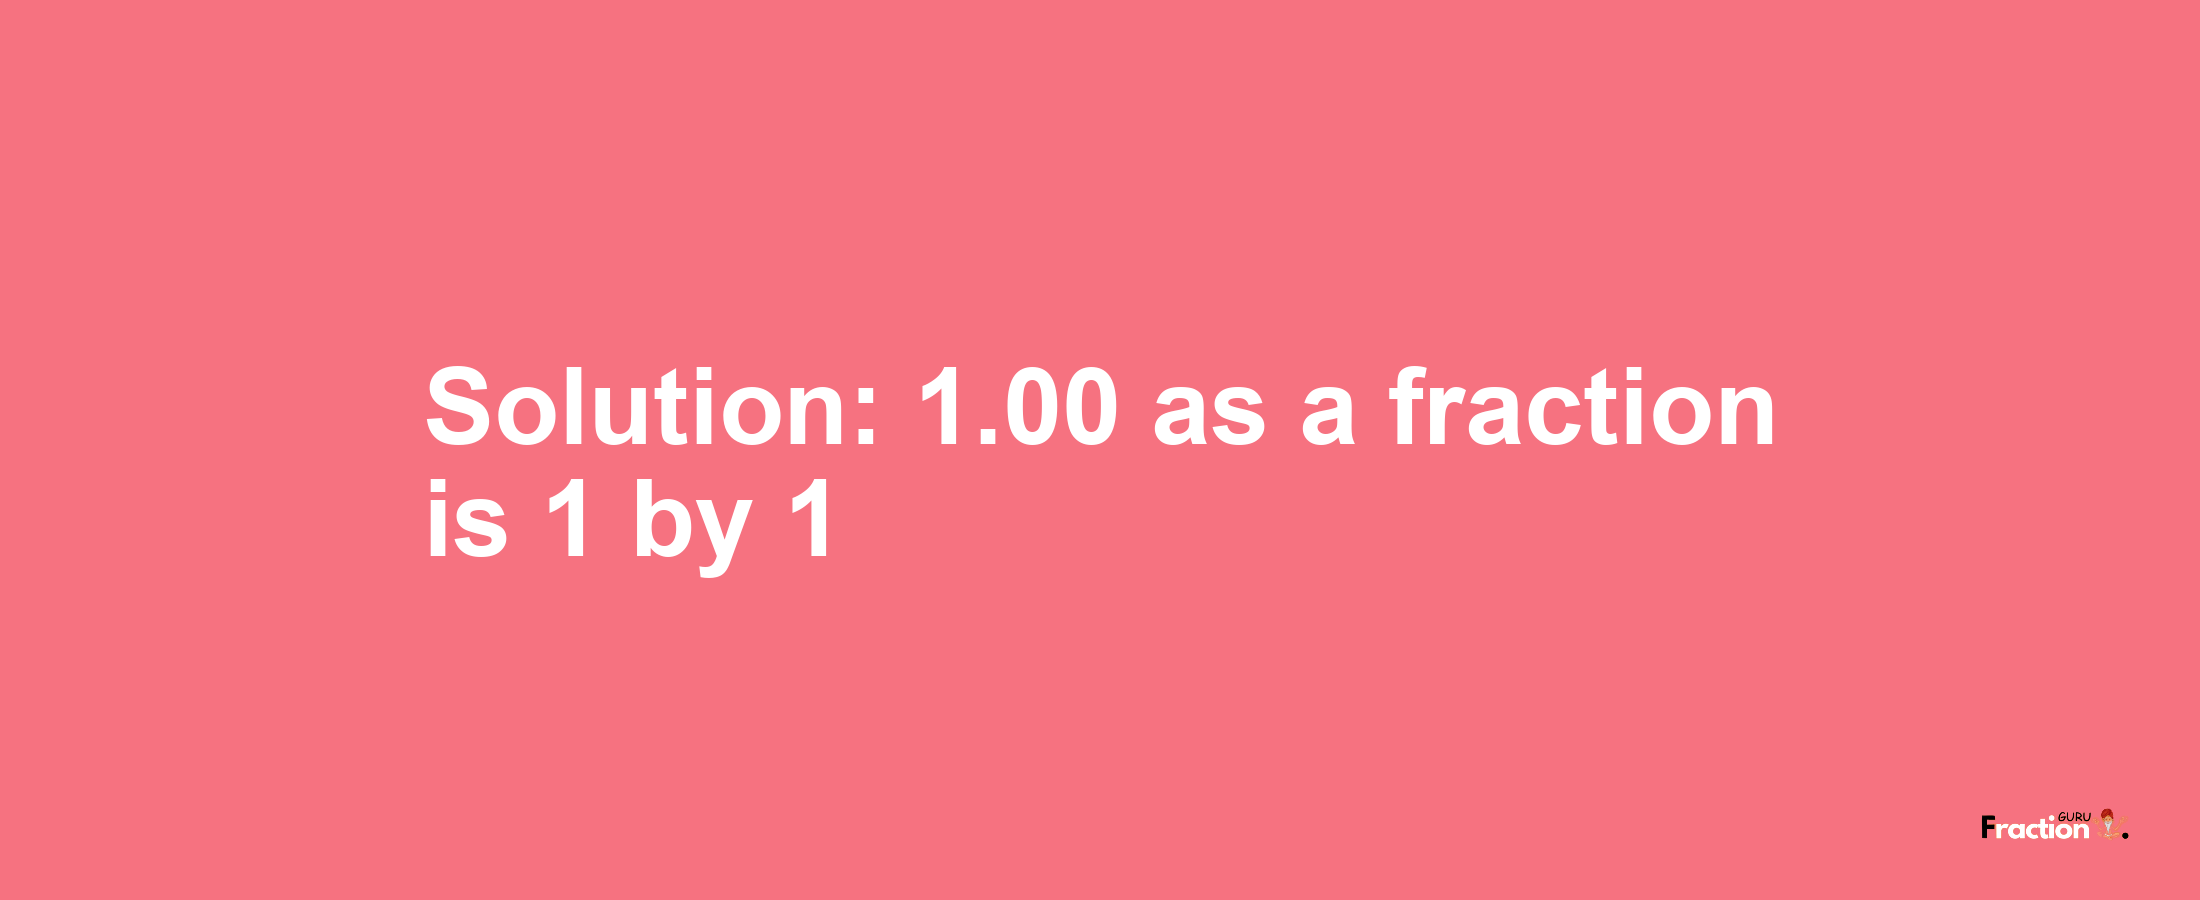 Solution:1.00 as a fraction is 1/1